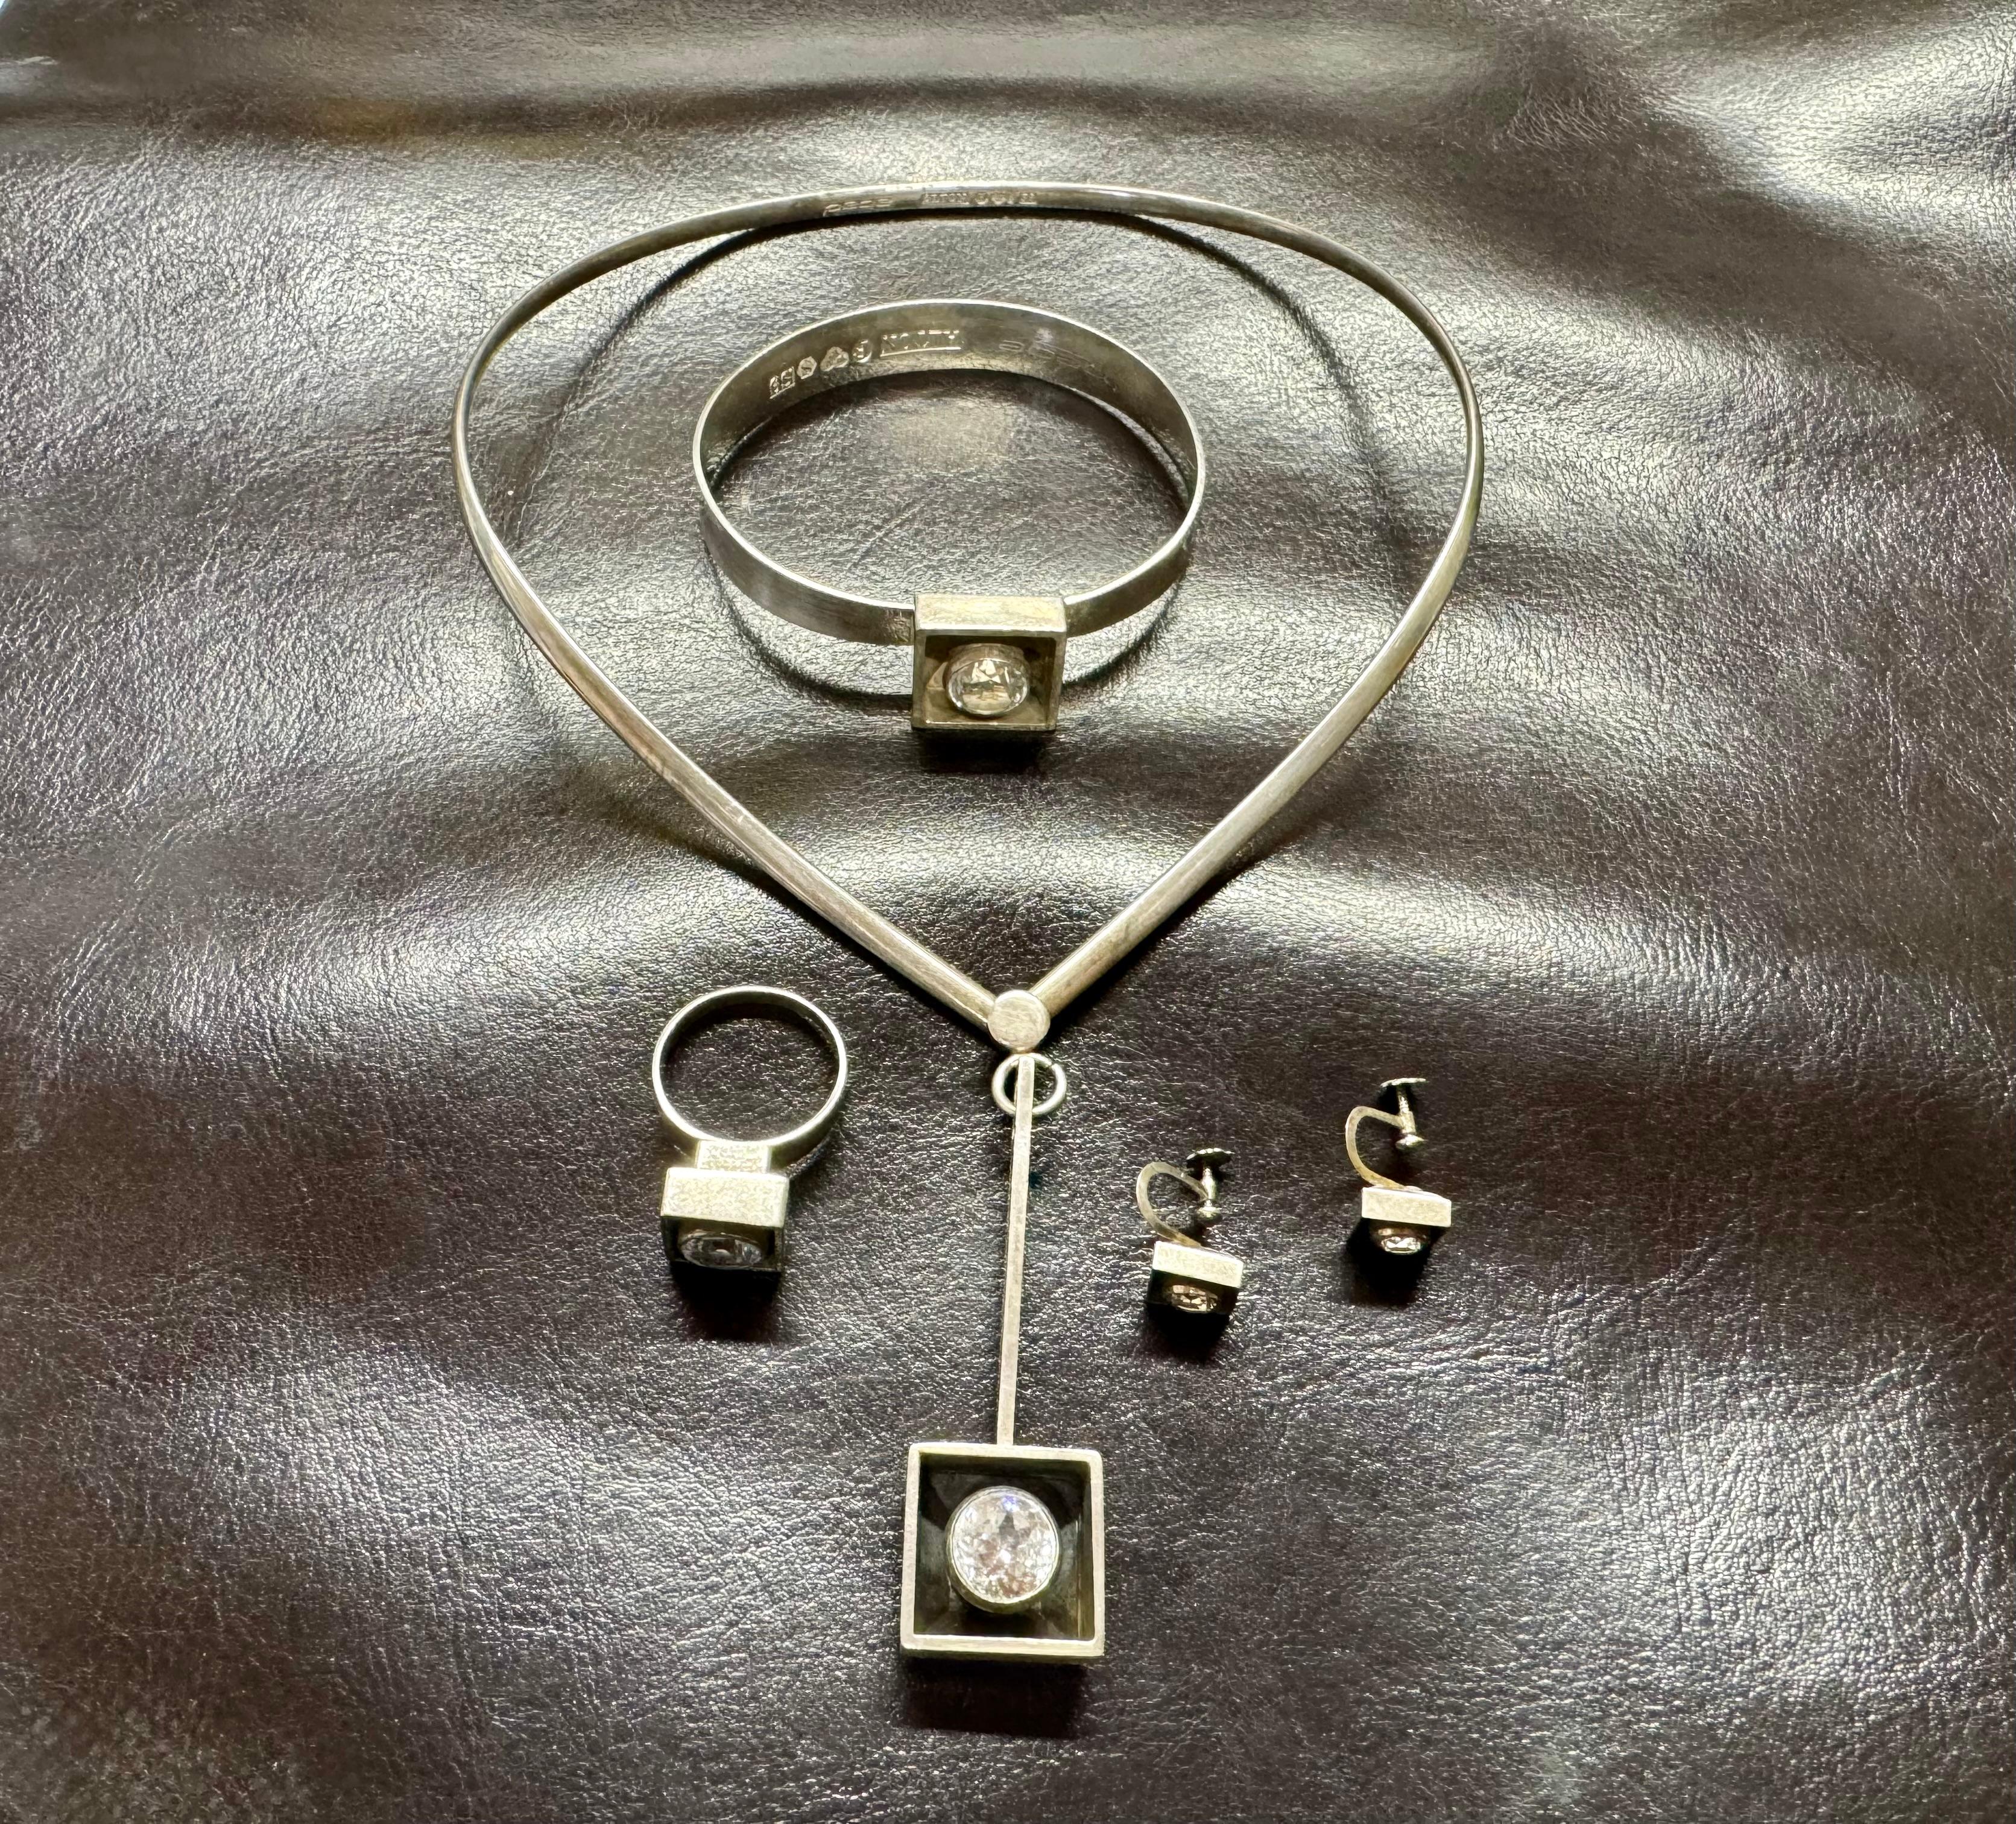 Sterling Necklace, Bracelet, Ring and Earring Rock Crystal Scandinavian Desing
Made 1968 and 1969
Ring 19mm =US 9
Sterling silver modernist set. Alton Sweden. Stampes and Pege ALTON , S9 and T9 for 1968/1969 and Swedish silver marks.
Creator: Alton